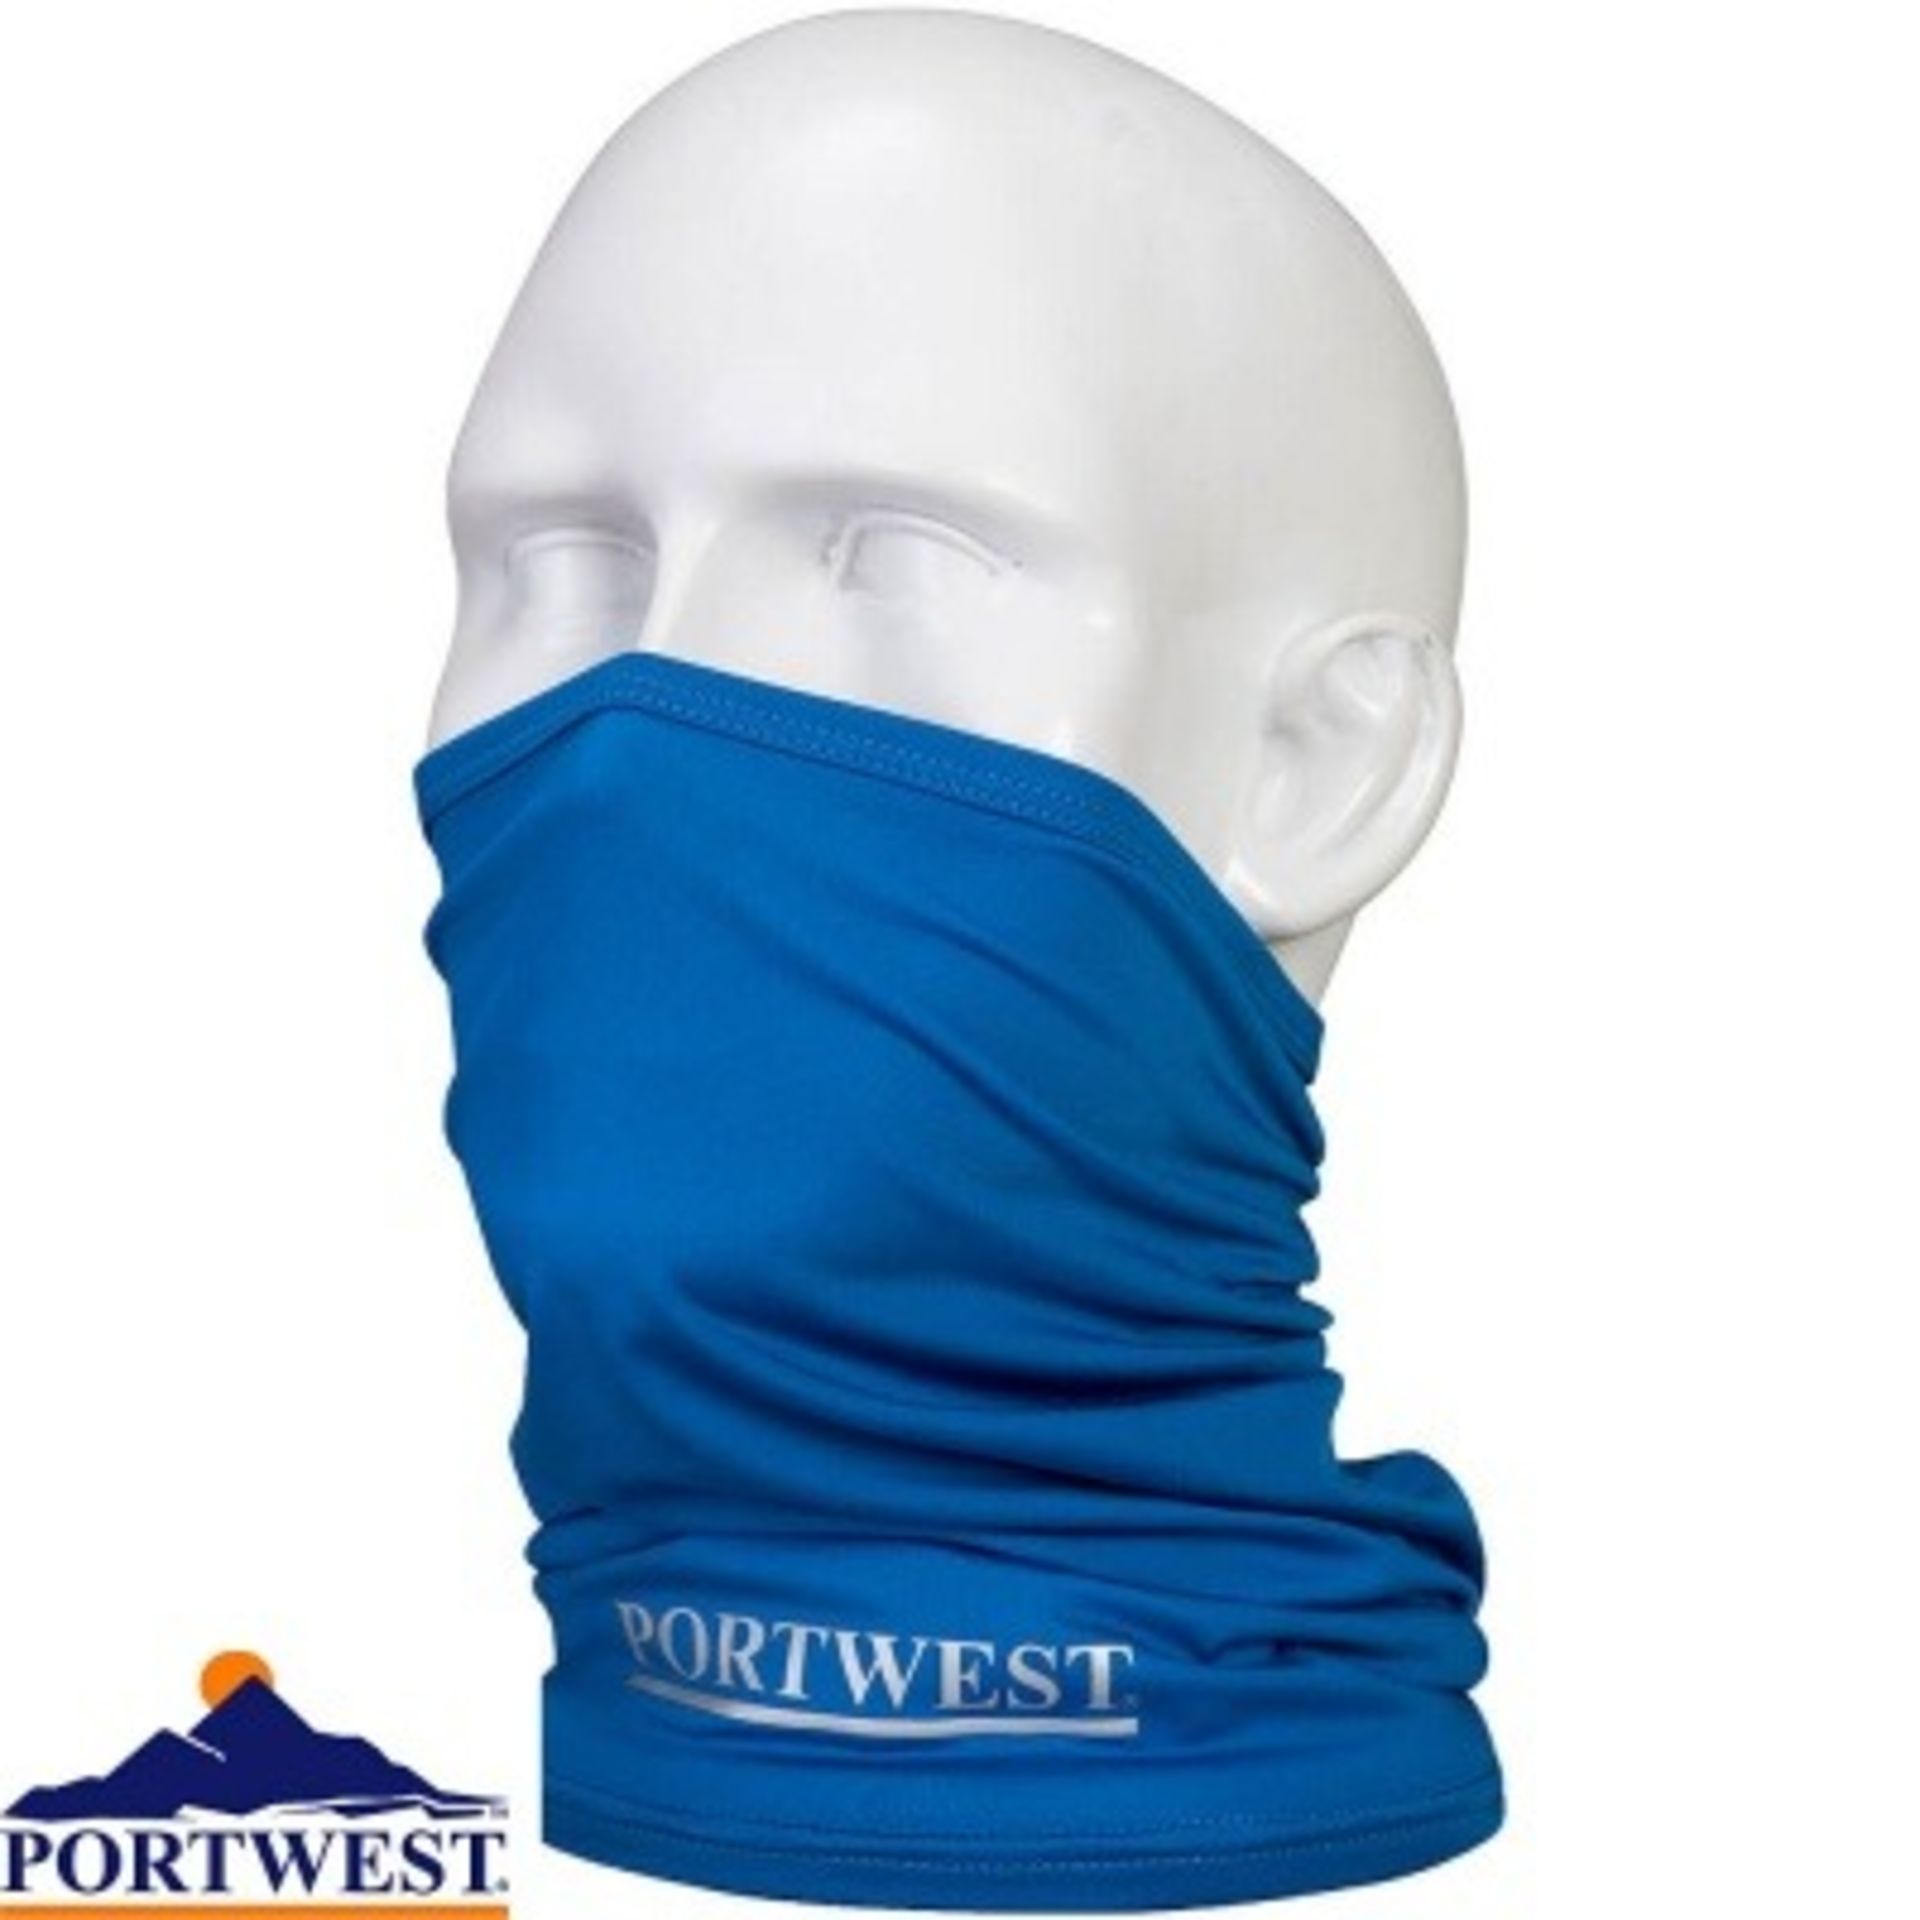 240x Brand New Portwest Anti-Microbial Lightweight Multiway Stretch Scarf - RRP £6.98 Each (R36)